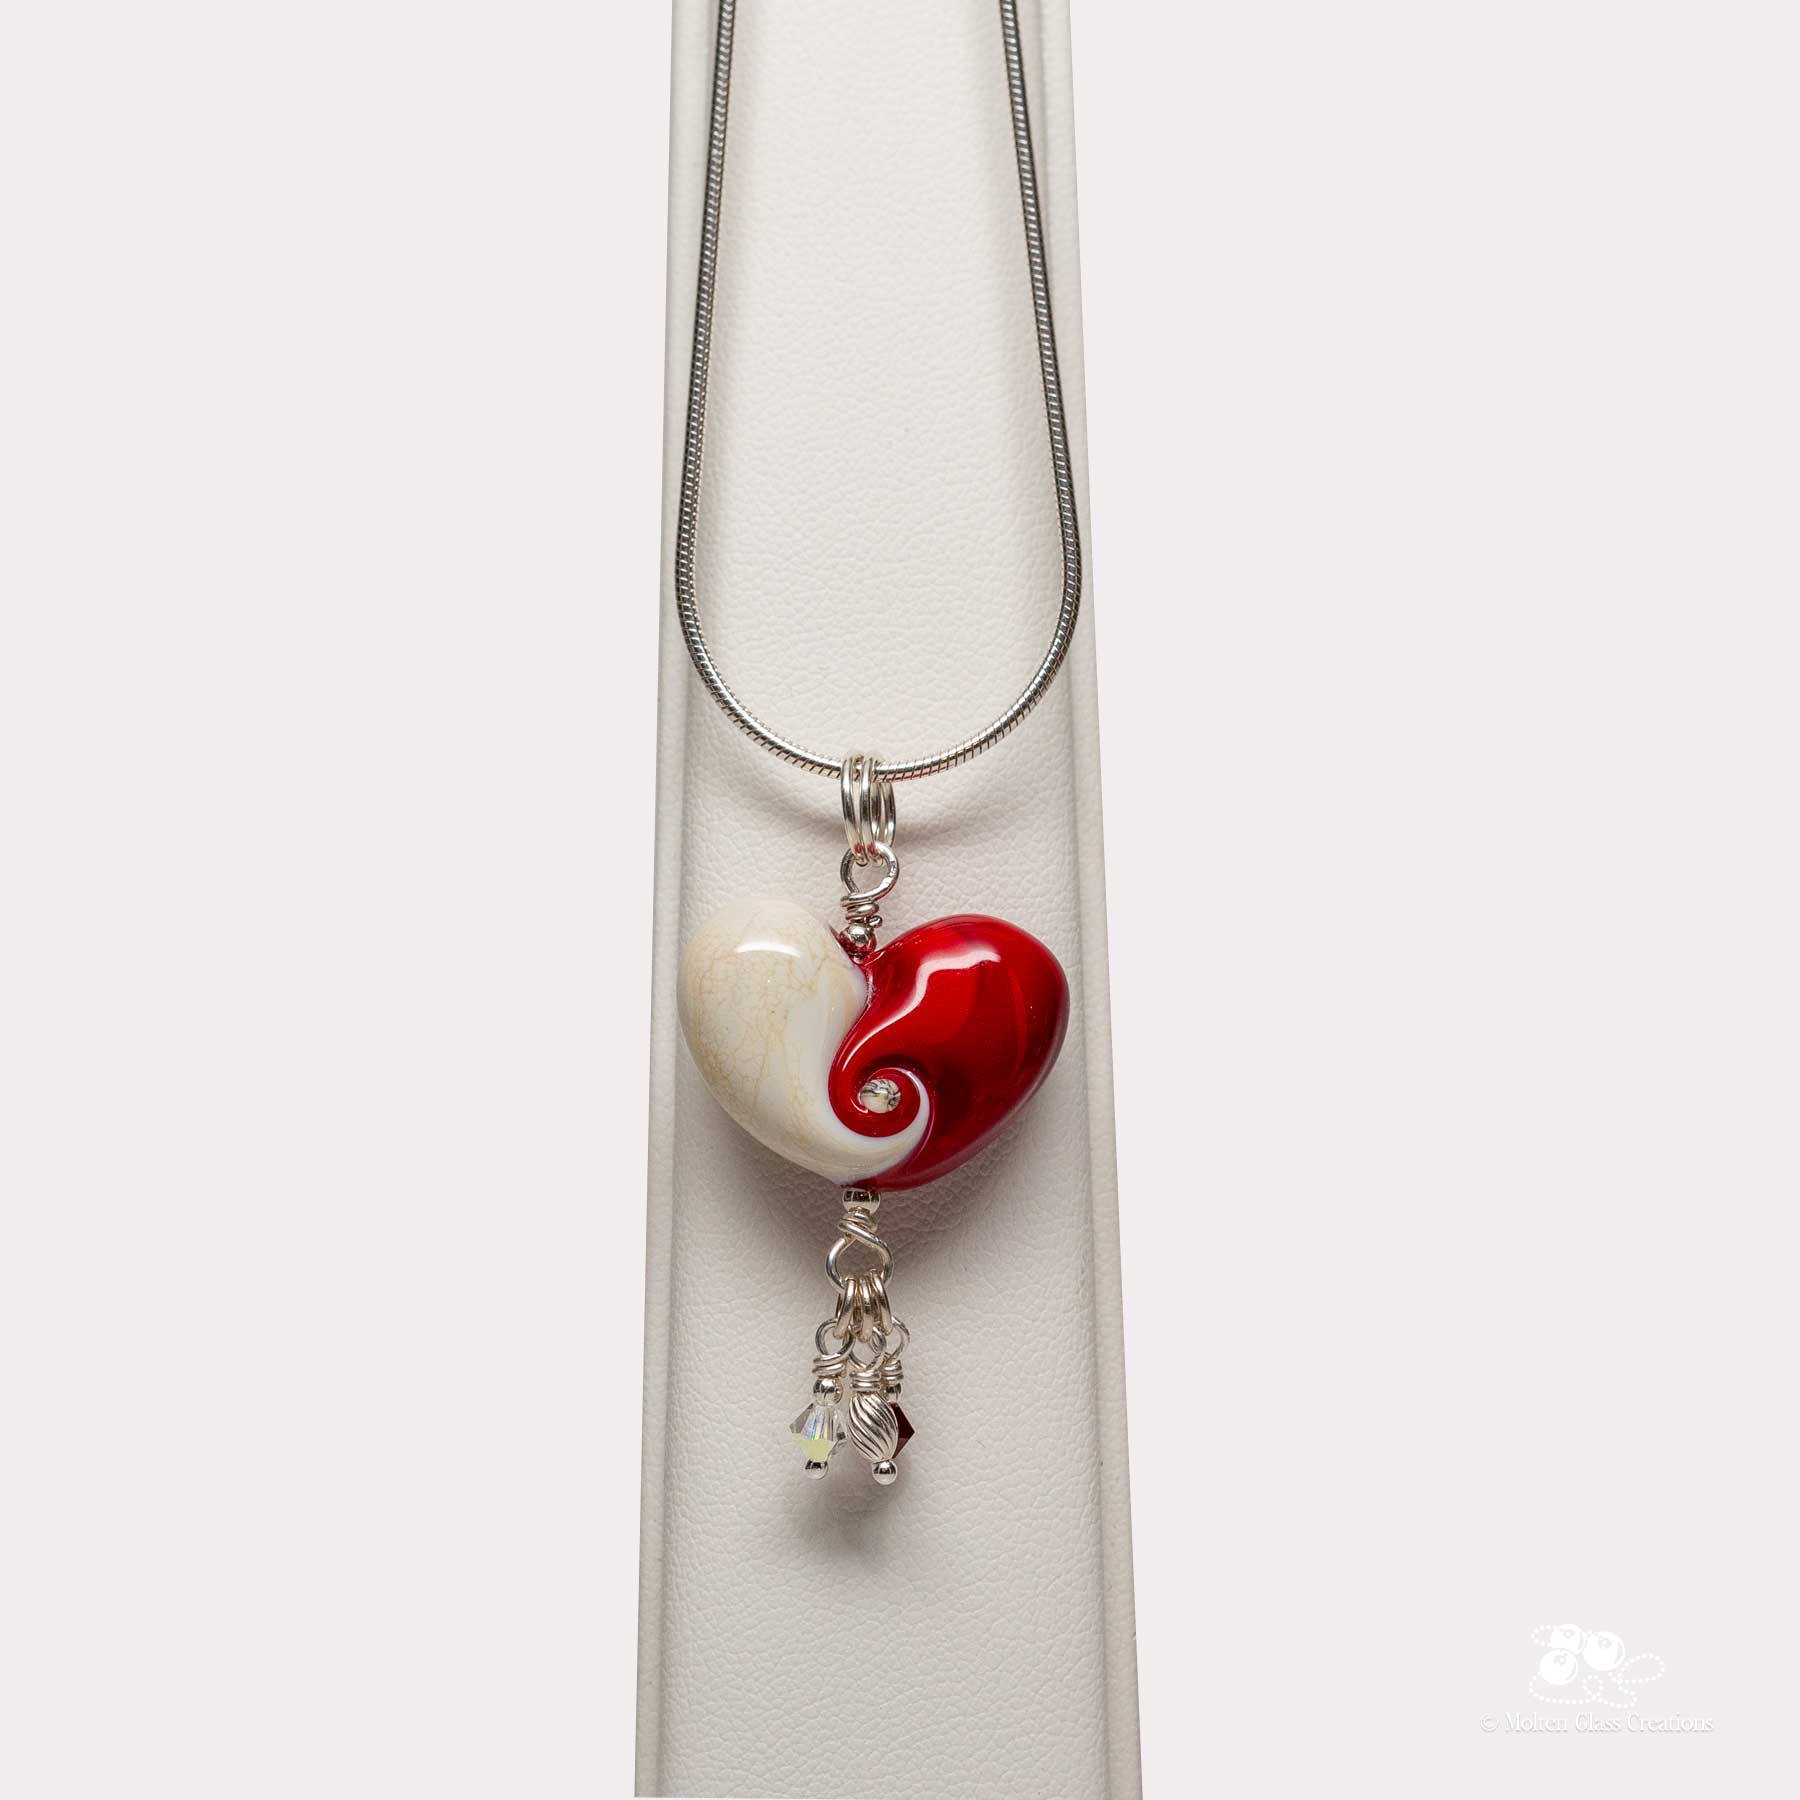 Red & Ivory Swirl glass heart necklace